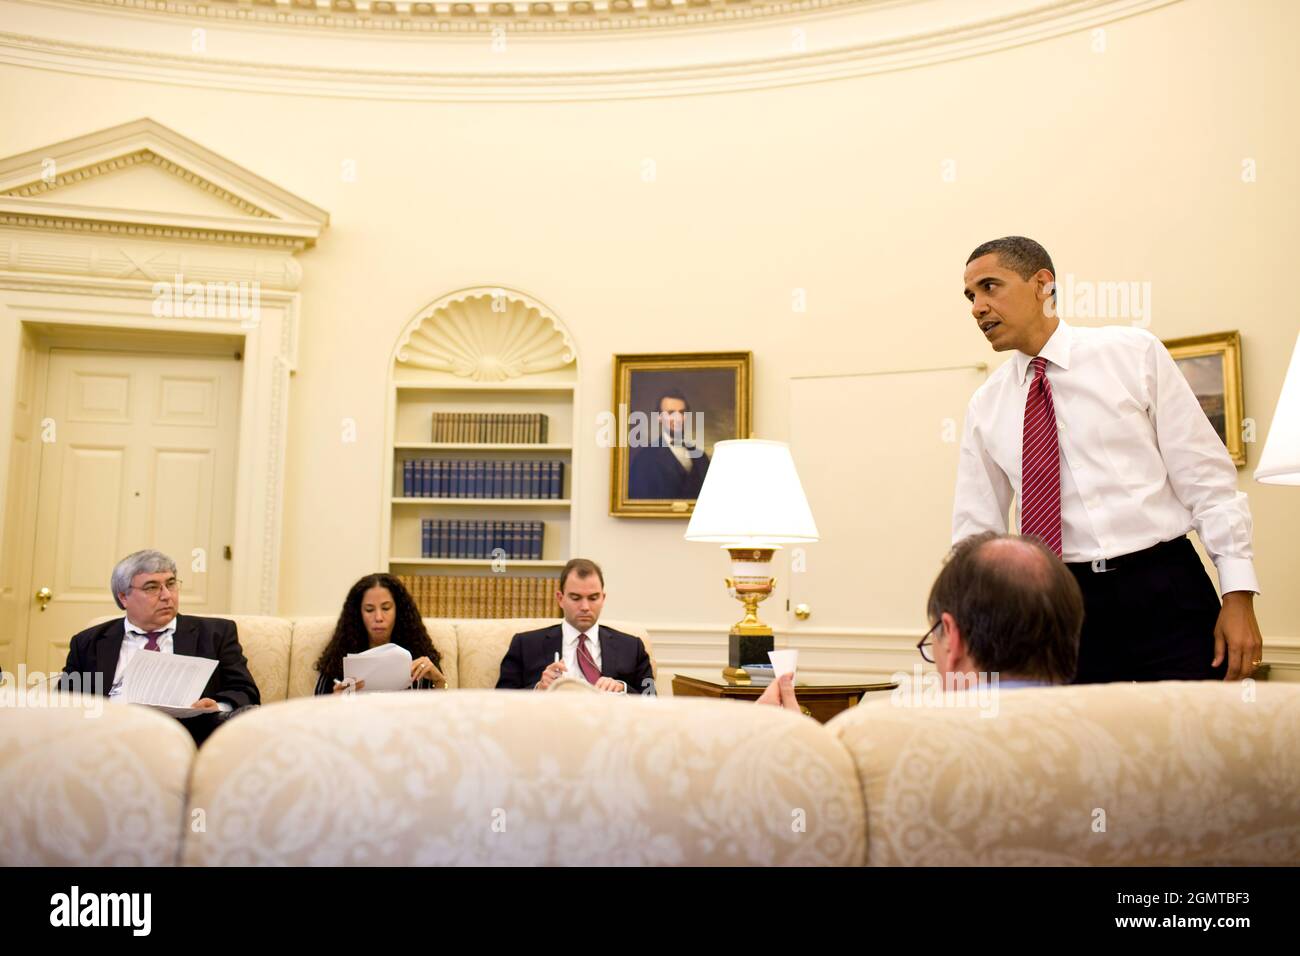 President Barack Obama meets with senior staff in the Oval Office, May 20, 2009. (Official White House photo by Pete Souza) This official White House photograph is being made available for publication by news organizations and/or for personal use printing by the subject(s) of the photograph. The photograph may not be manipulated in any way or used in materials, advertisements, products, or promotions that in any way suggest approval or endorsement of the President, the First Family, or the White House. Stock Photo